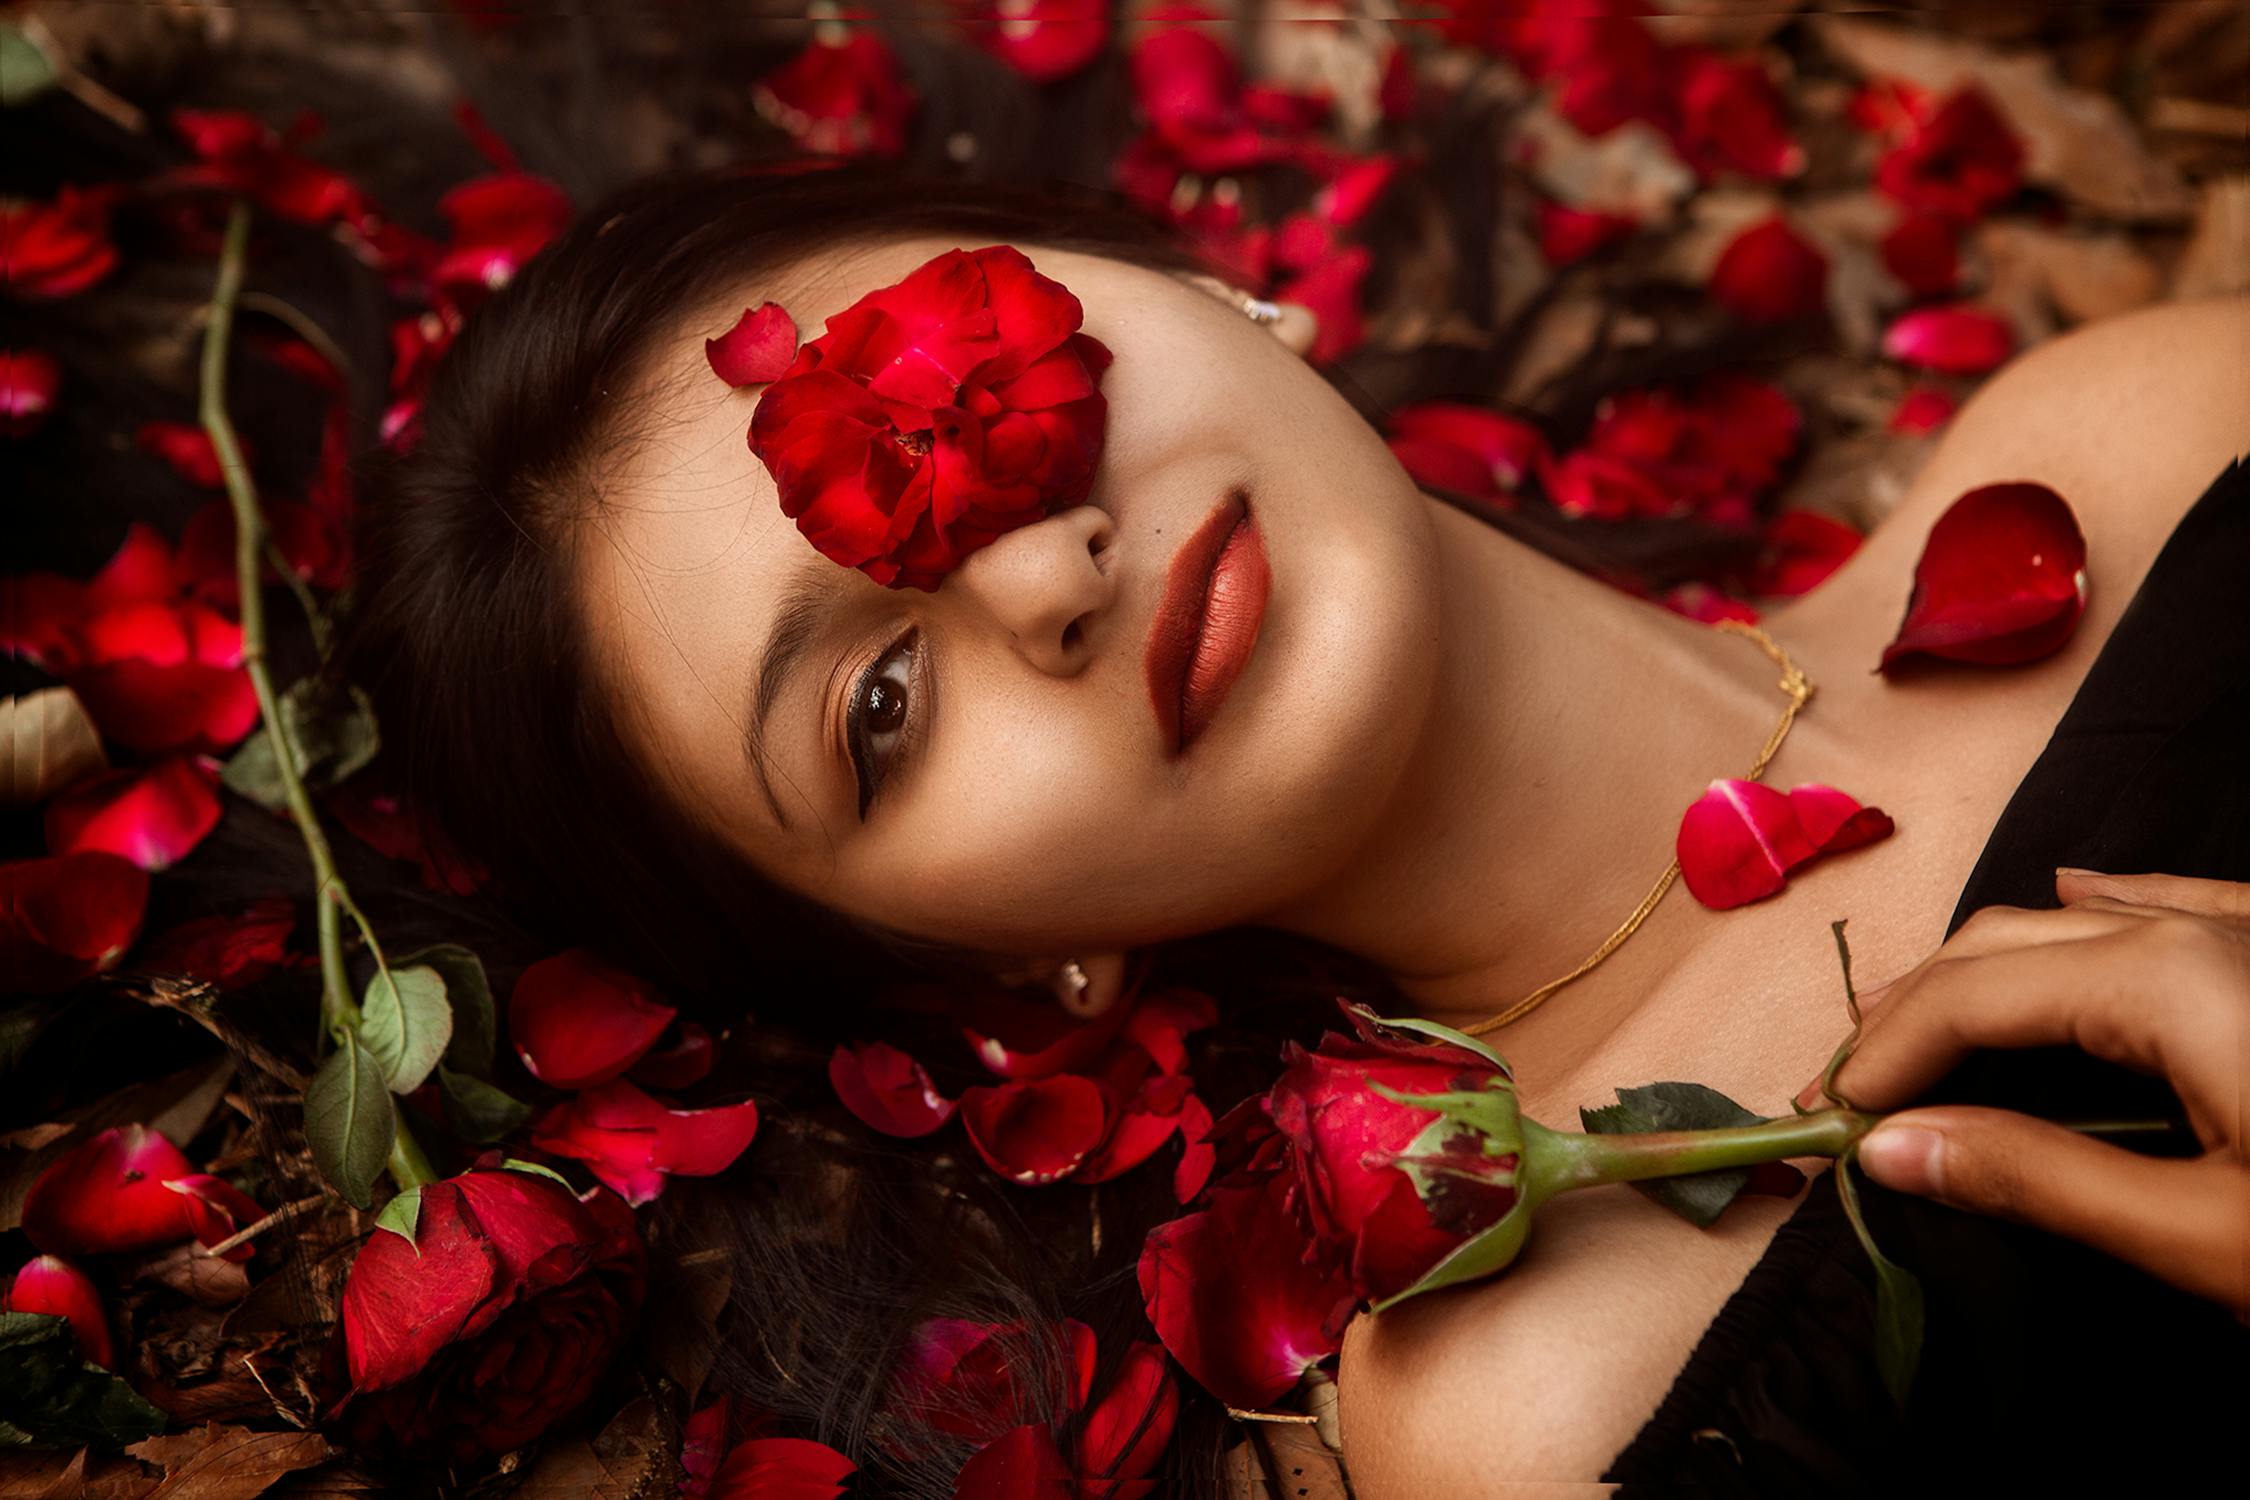 Lady with Red Roses Photo by Nivan Shrestha from Pexels: https://www.pexels.com/photo/woman-lying-on-petals-of-red-roses-7847905/